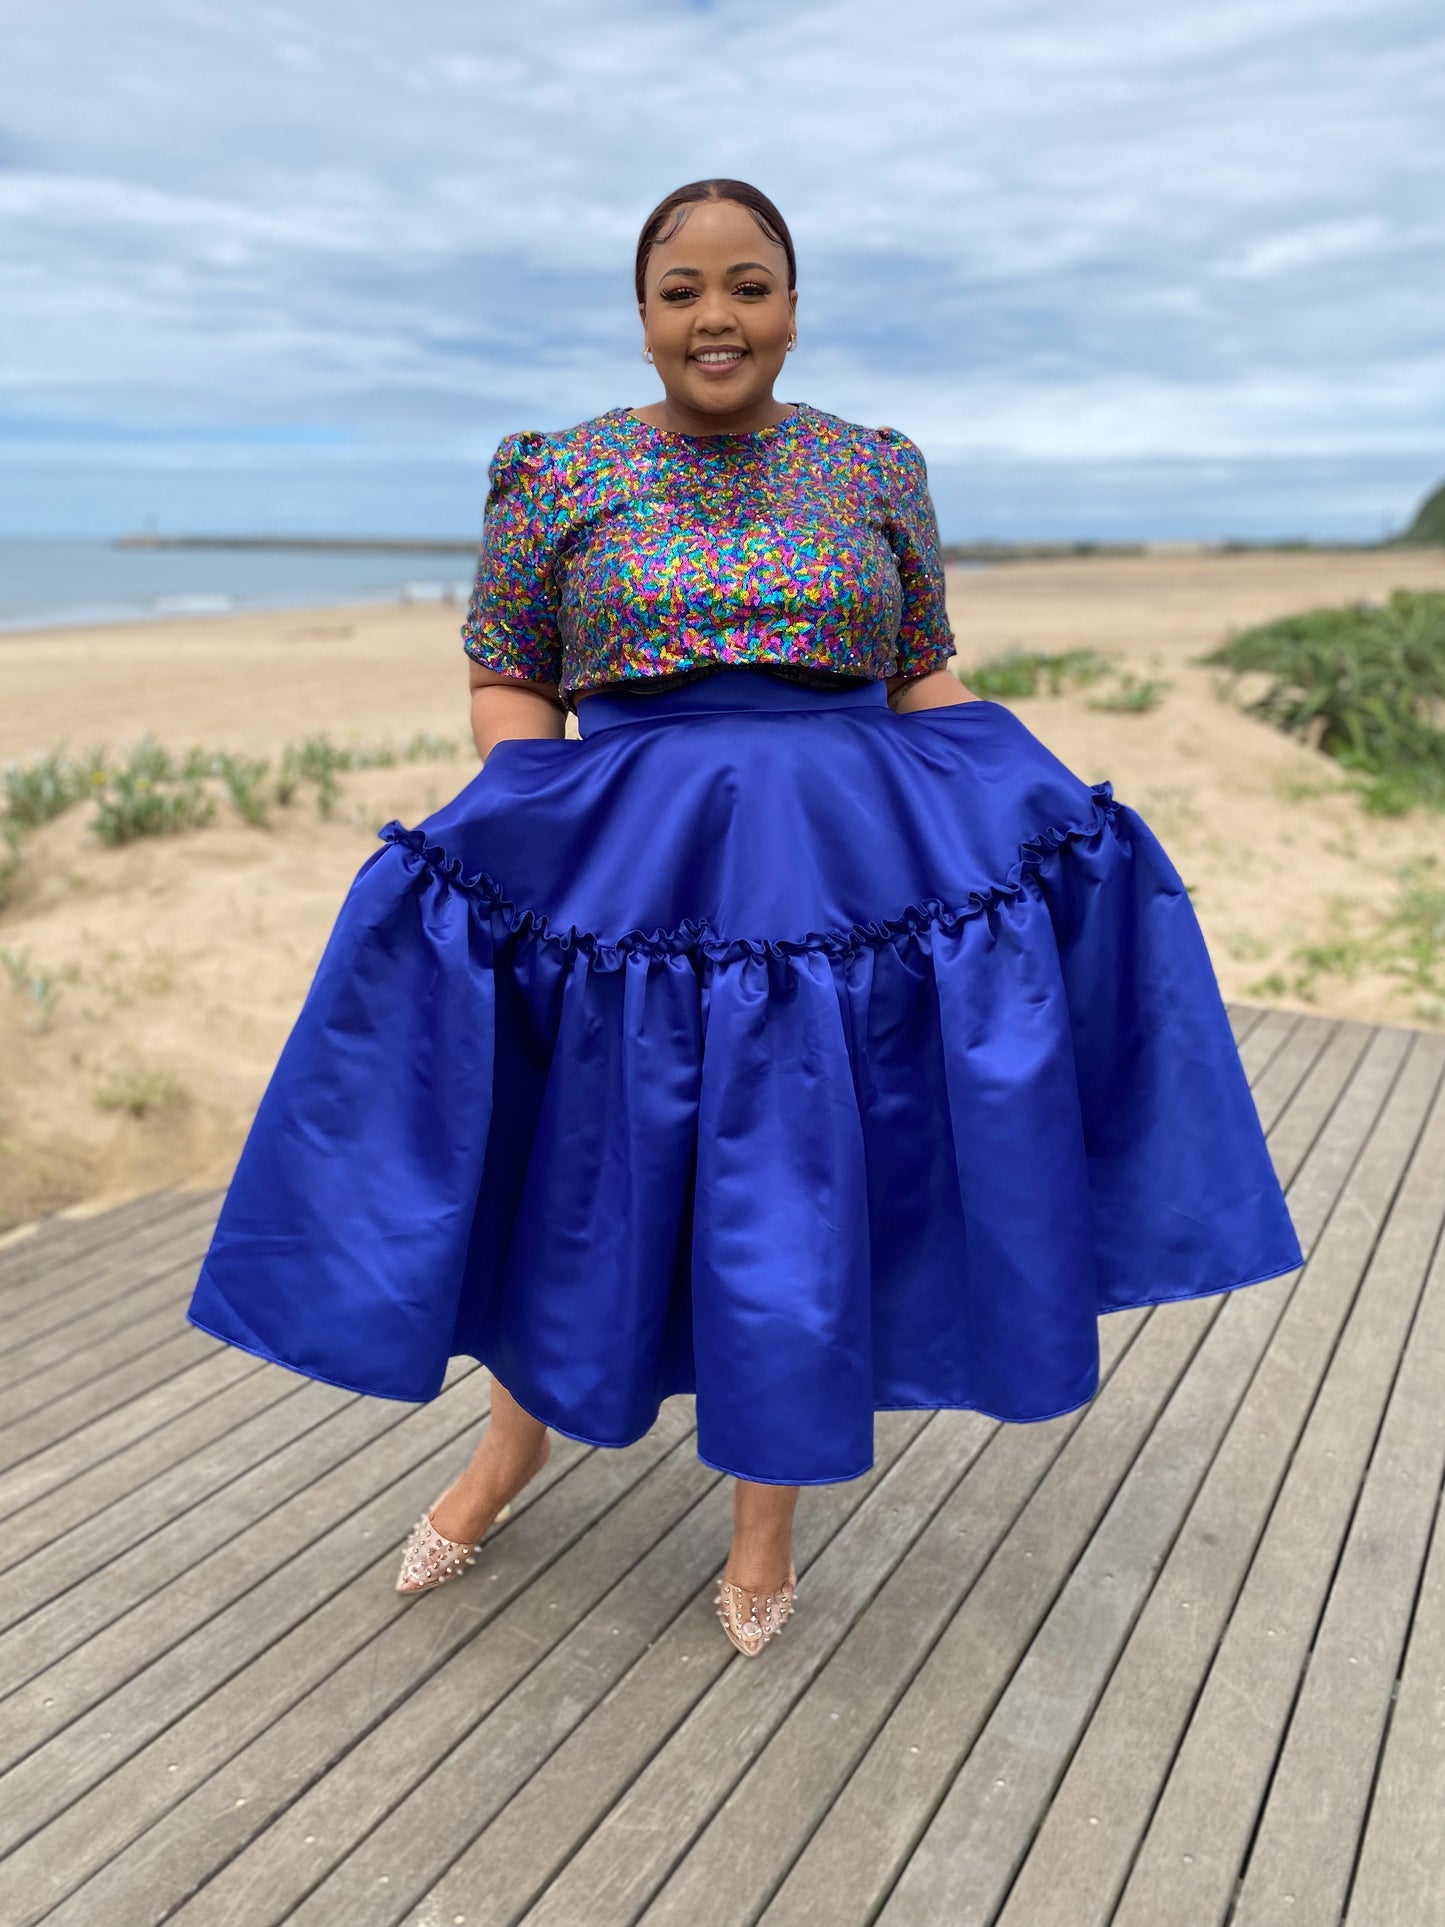 Royal blue duchess skirt (allow 3-5 days for completion of order)